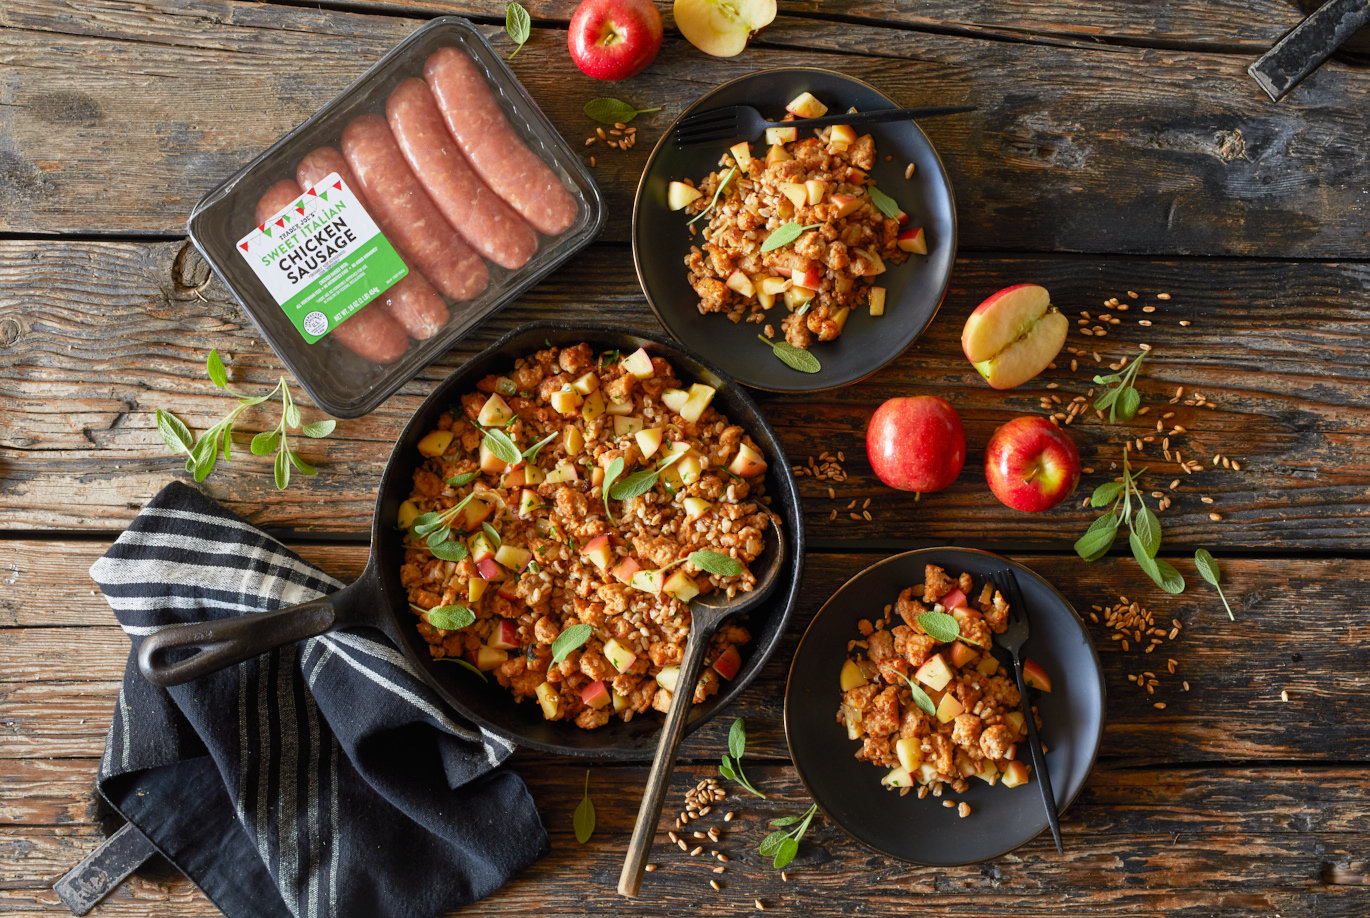 Trader Joe's Sweet Italian Chicekn Sausage used in recipe for Farro with Chicken Sausage; served in a cast iron skillet and two plates, dried farro, apples and sage leaves on surface